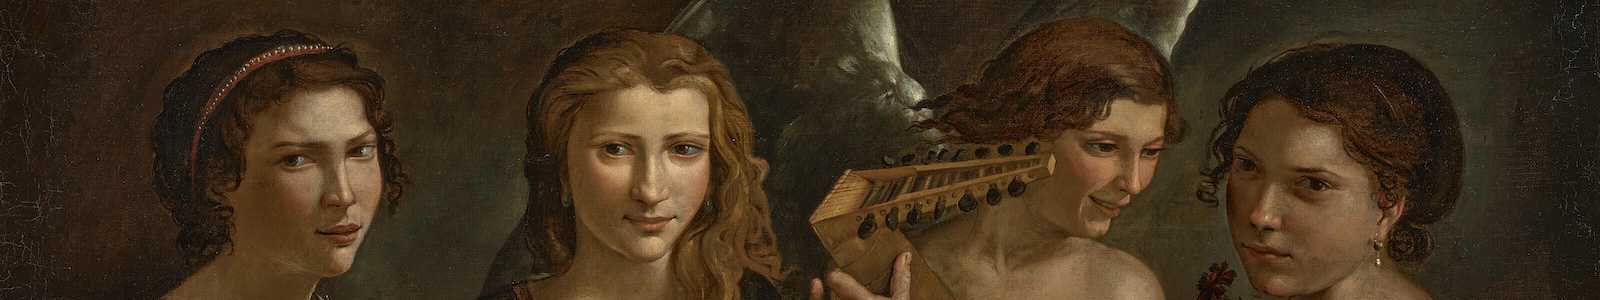 Remastered: Old Masters from the Collection of J.E. Safra